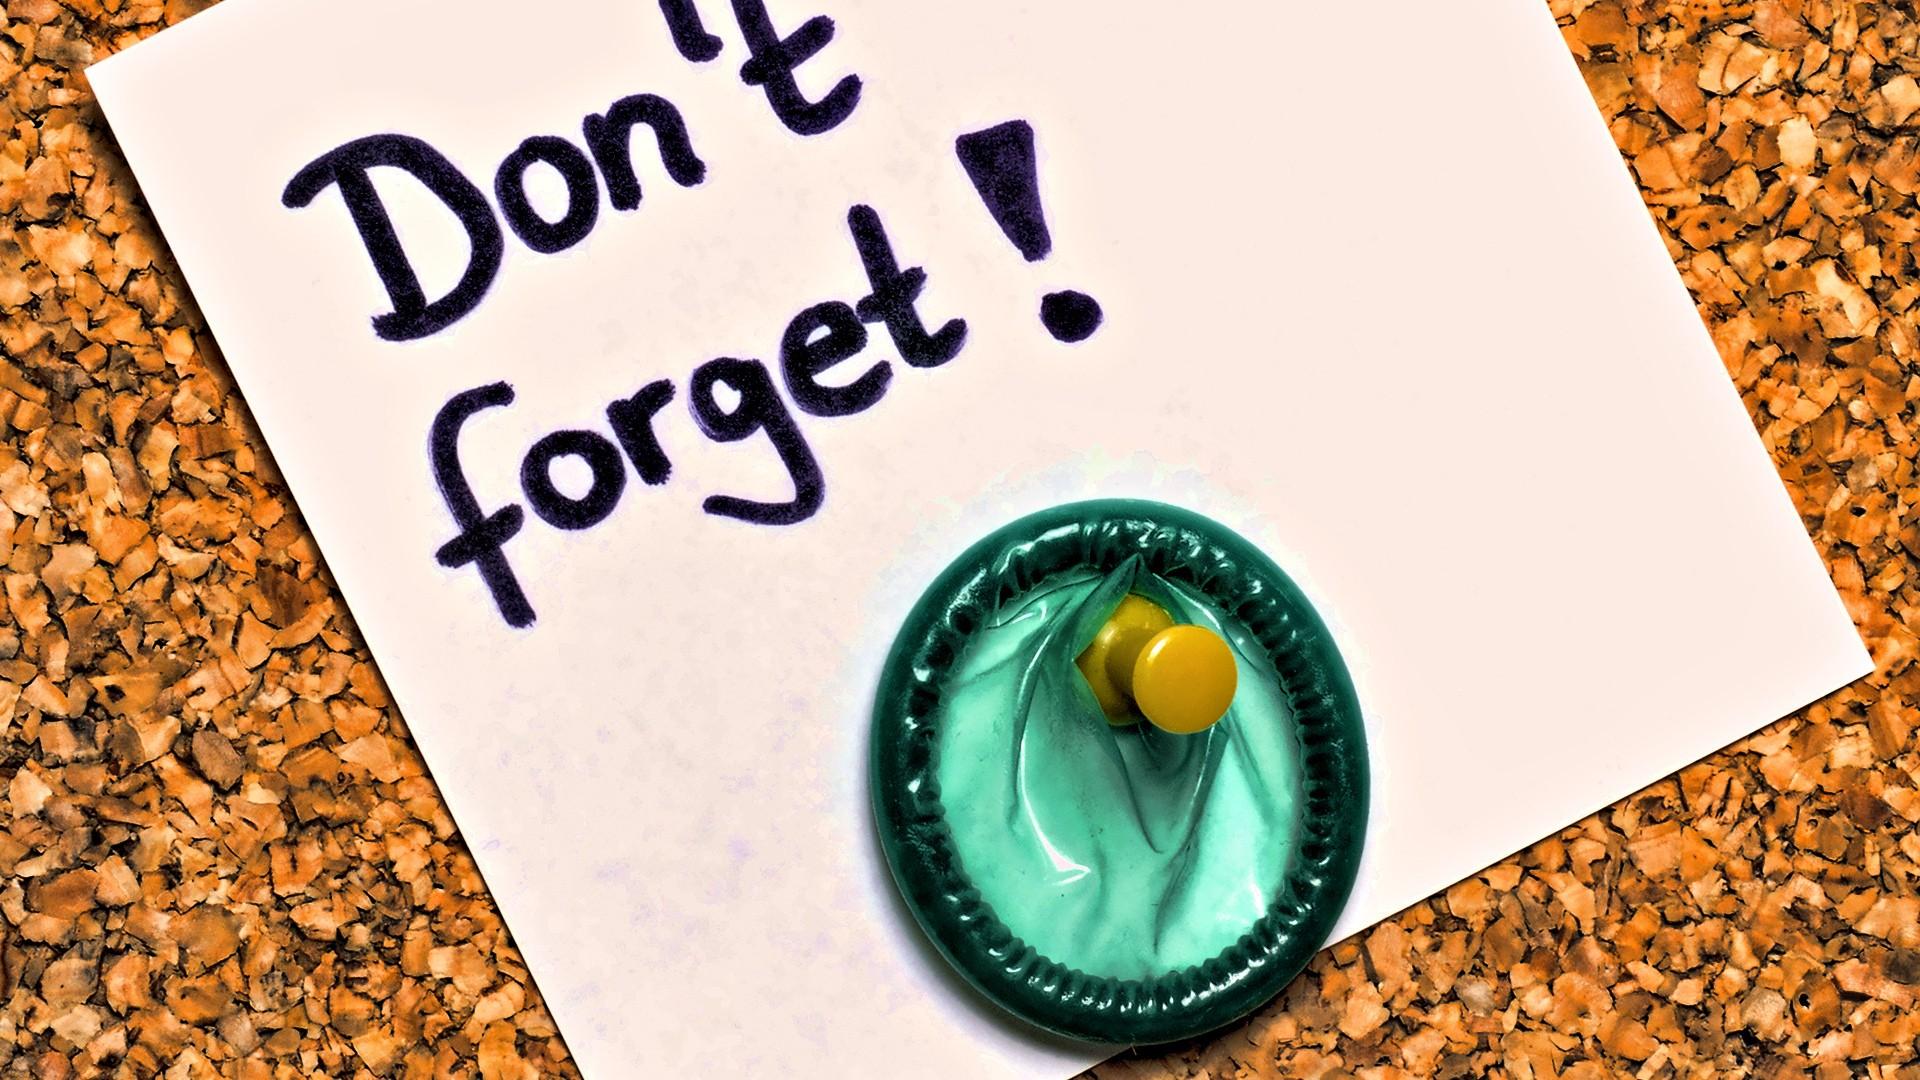 Download the Dont Forget Condoms Wallpaper, Dont Forget Condoms